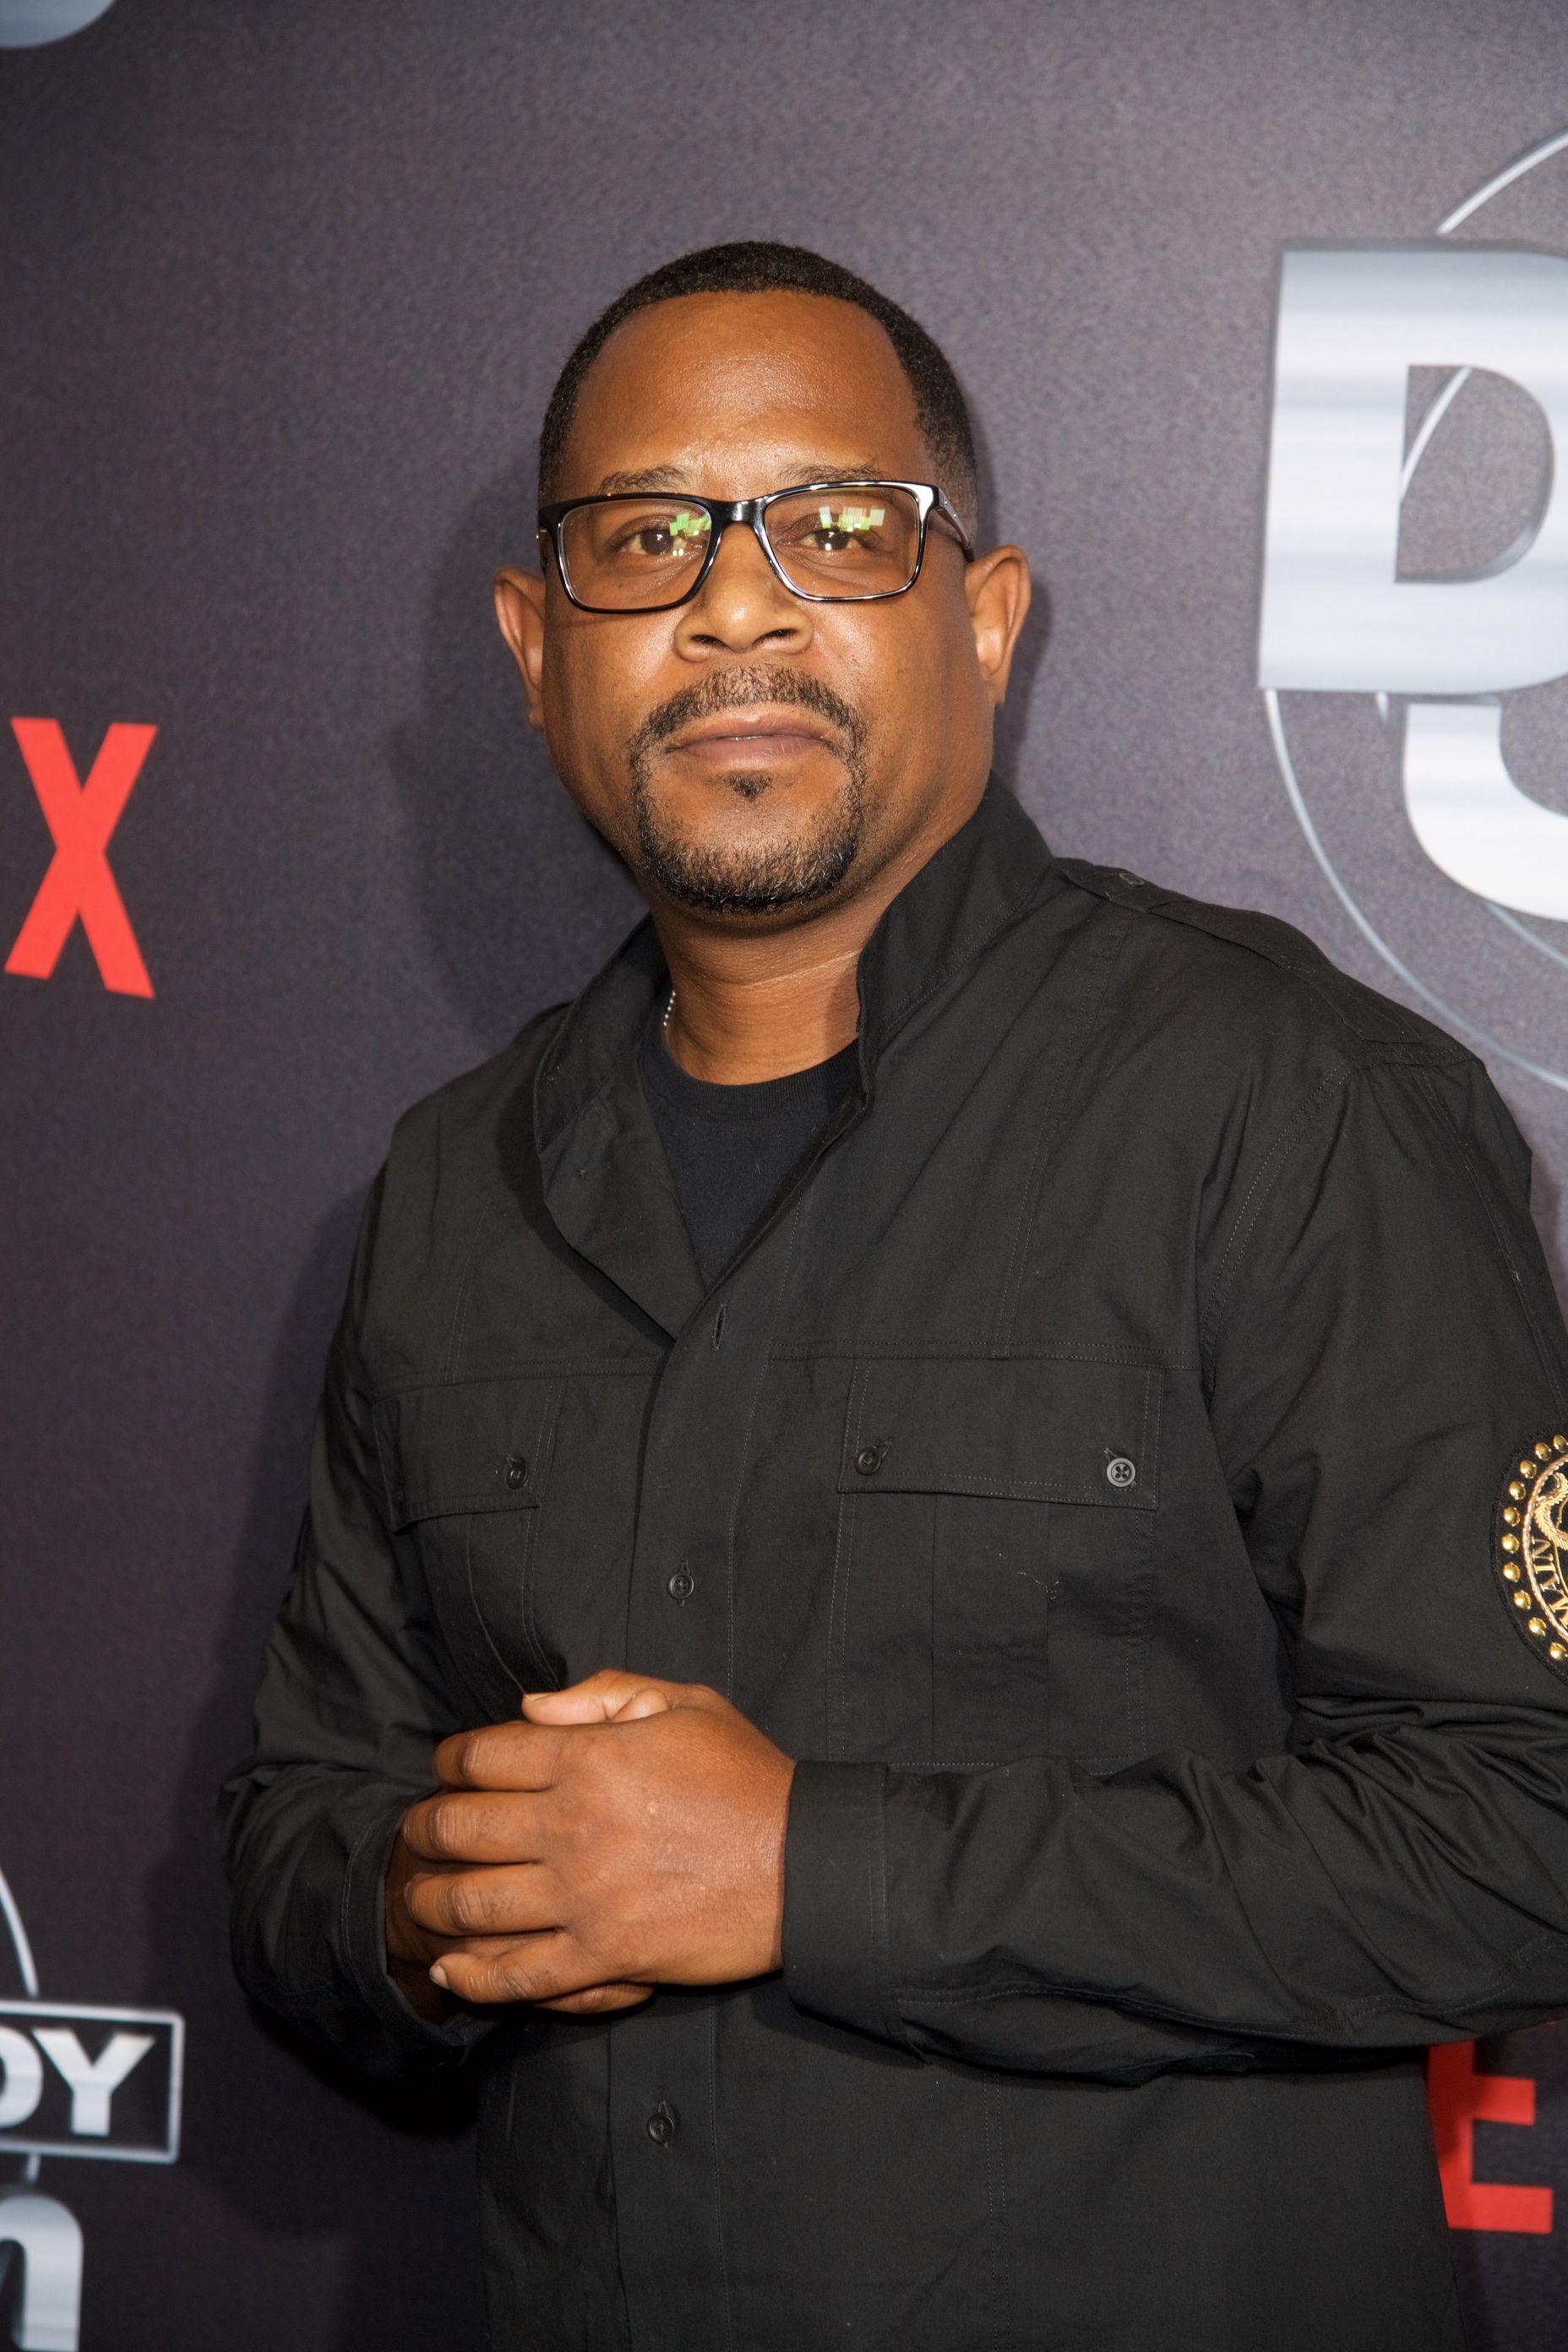 Comedy actor Martin Lawrence at Netflix Presents Russell Simmons' "Def Comedy Jam 25" Special Event at The Beverly Hilton Hotel on September 10, 2017. | Photo: Getty Images